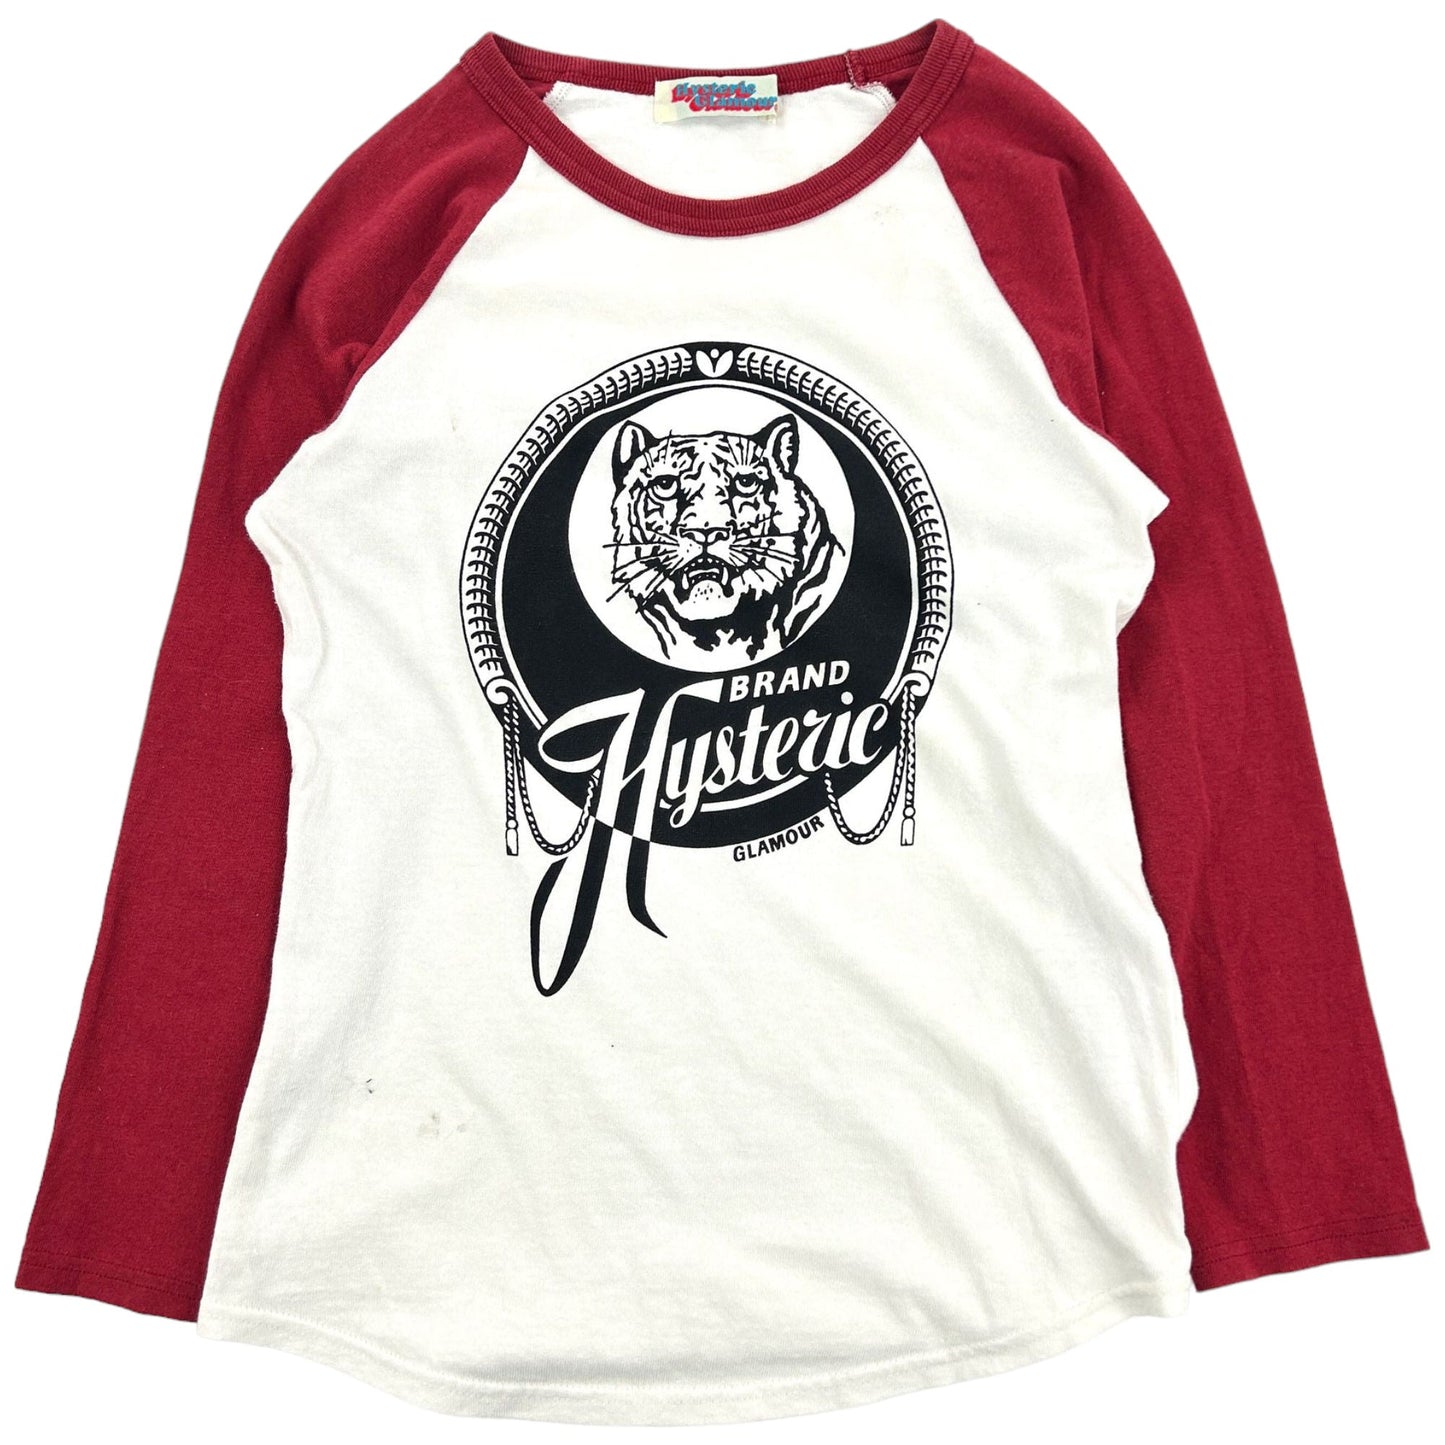 Vintage Hysteric Glamour Tiger Graphic Raglan T-Shirt Woman's Size S